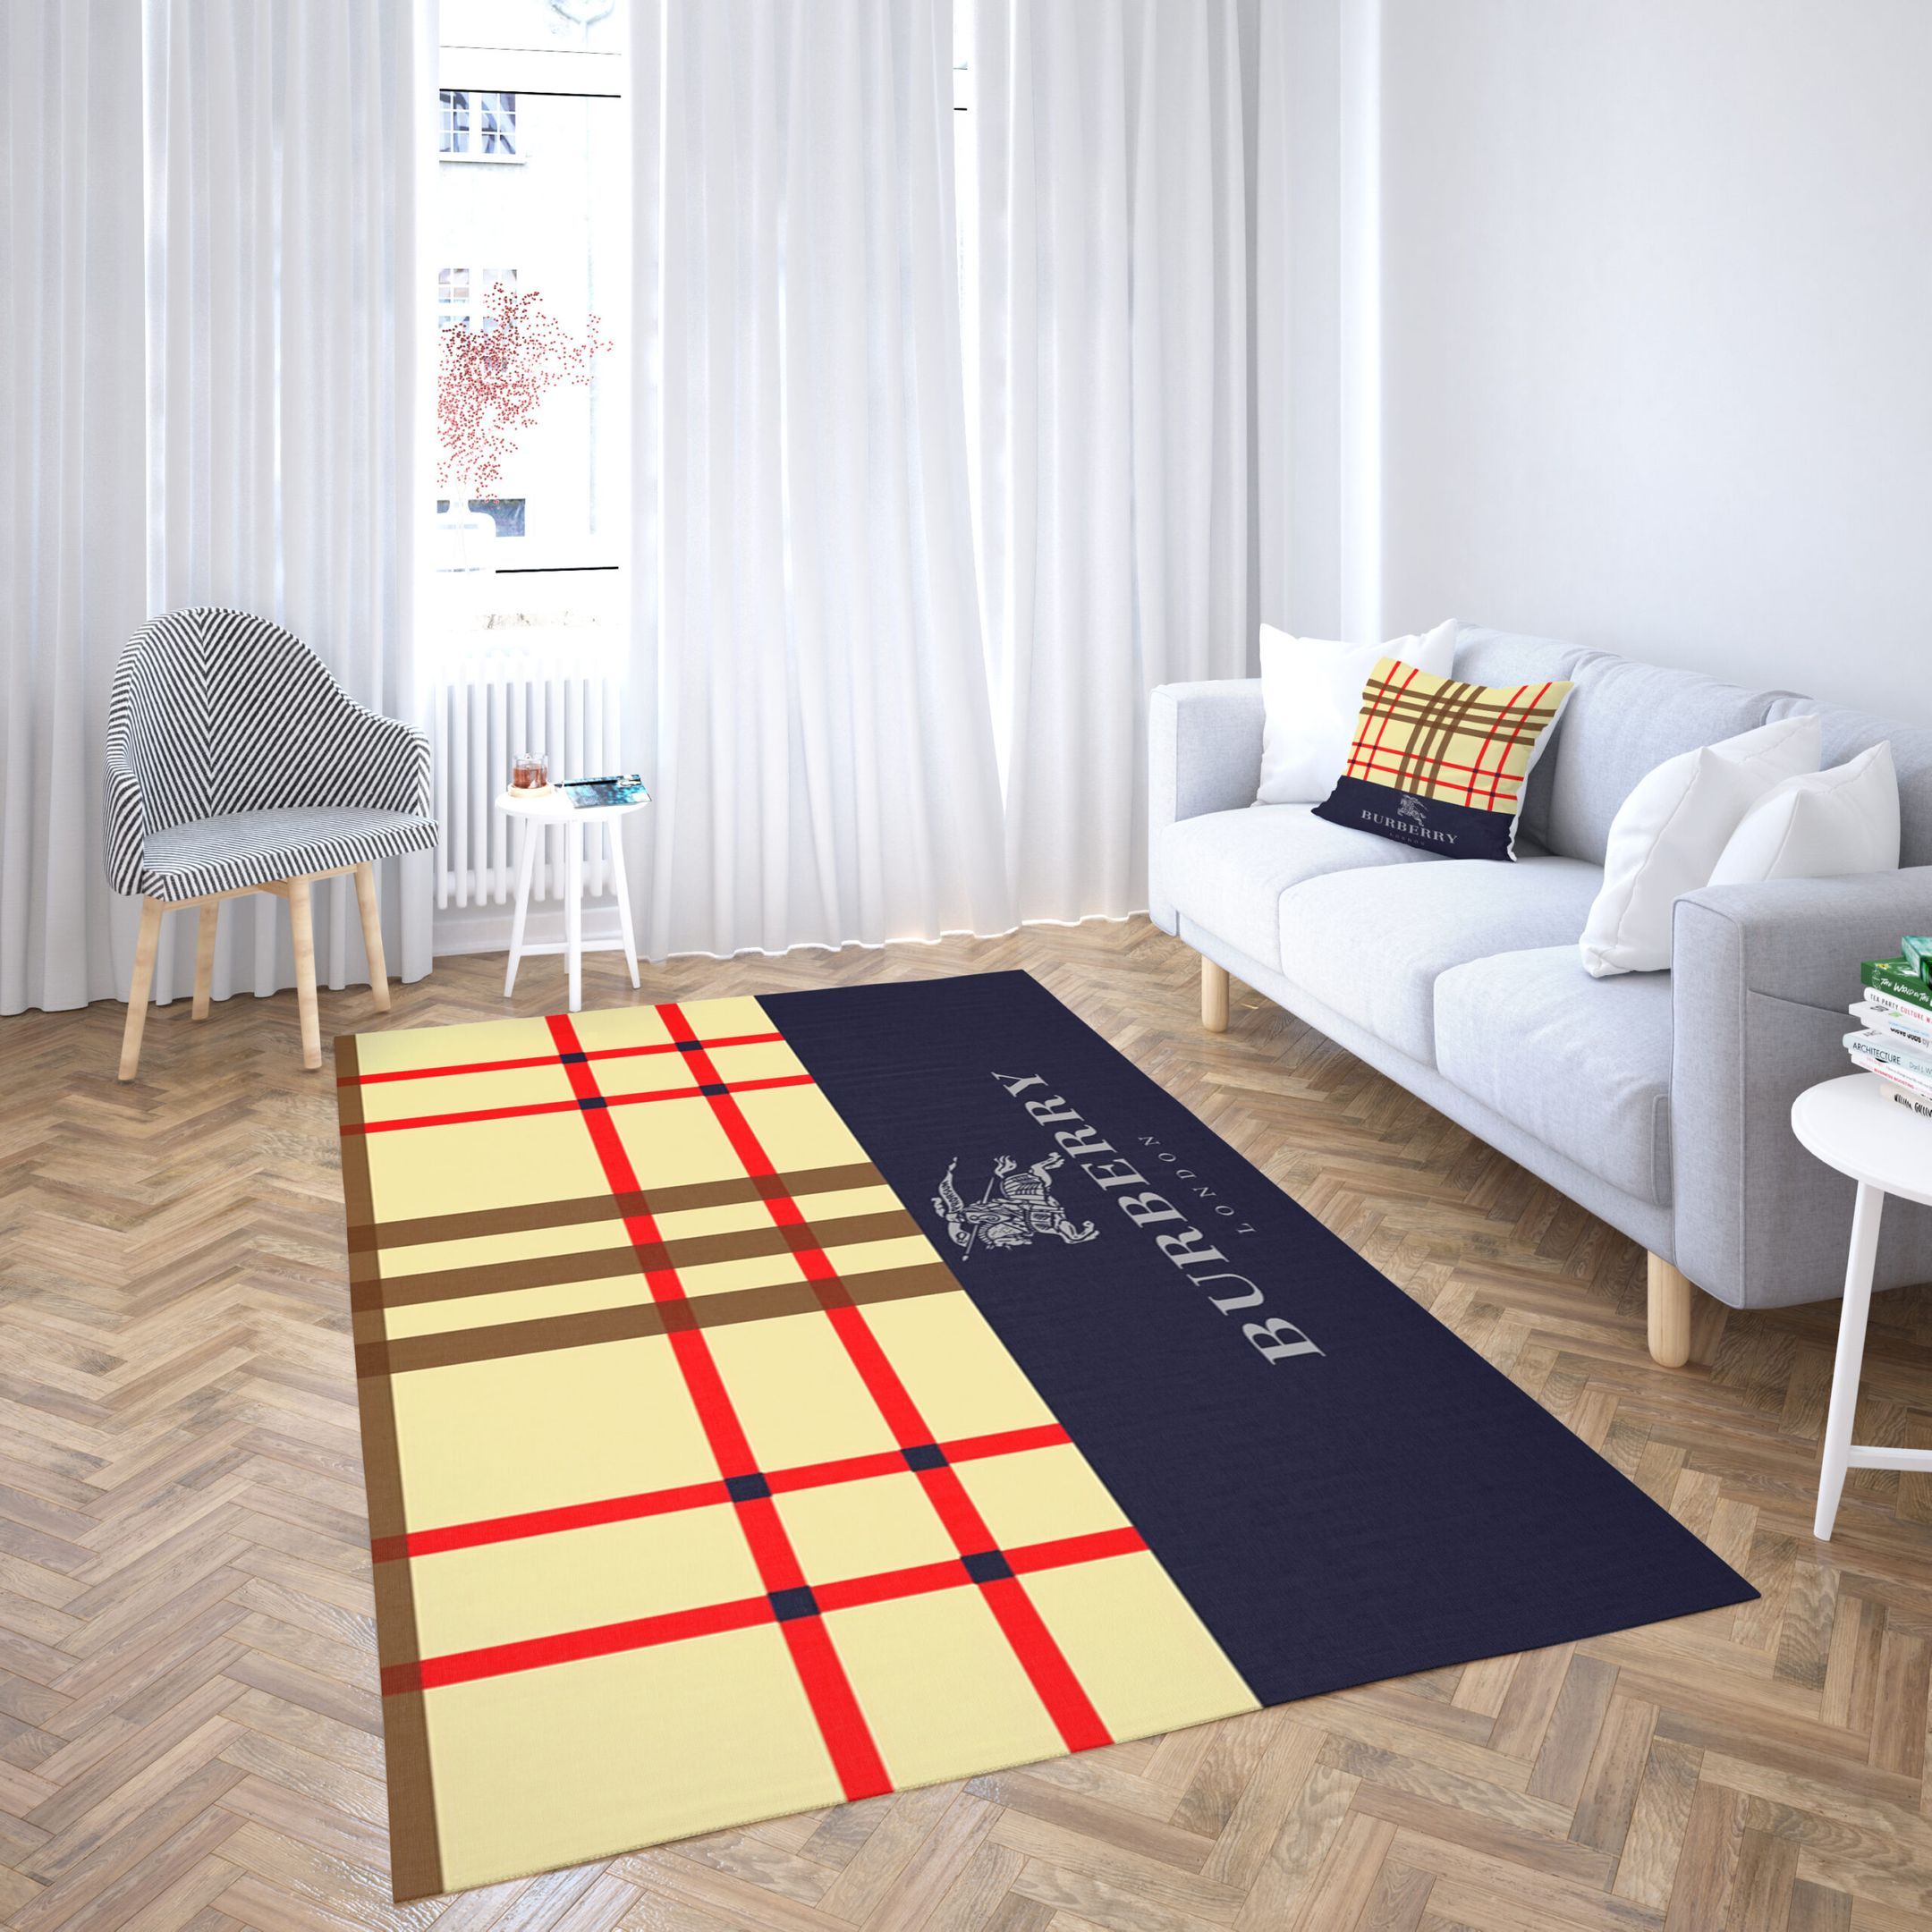 Burberry Luxury Brand 16 Area Rug Living Room And Bedroom Rug Us Gift Decor VH3